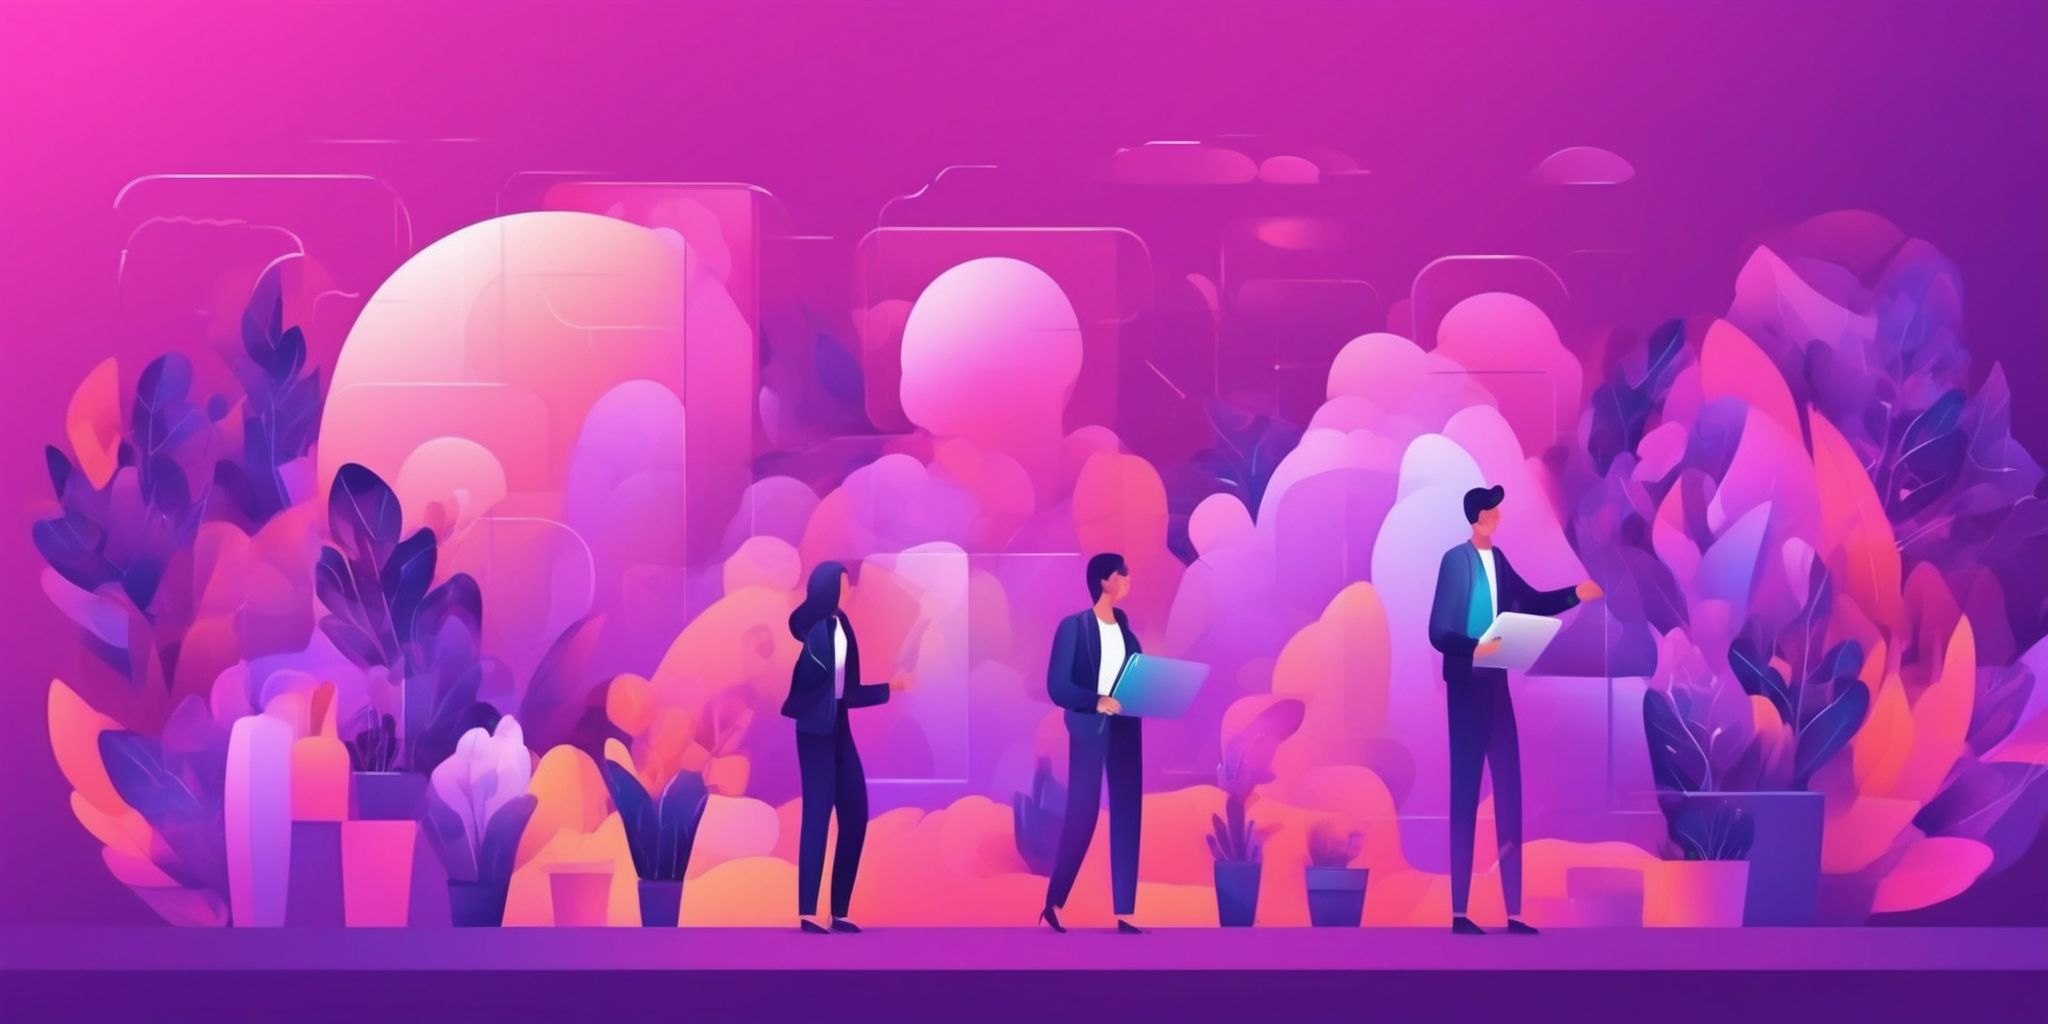 Promotional outreach in flat illustration style, colorful purple gradient colors